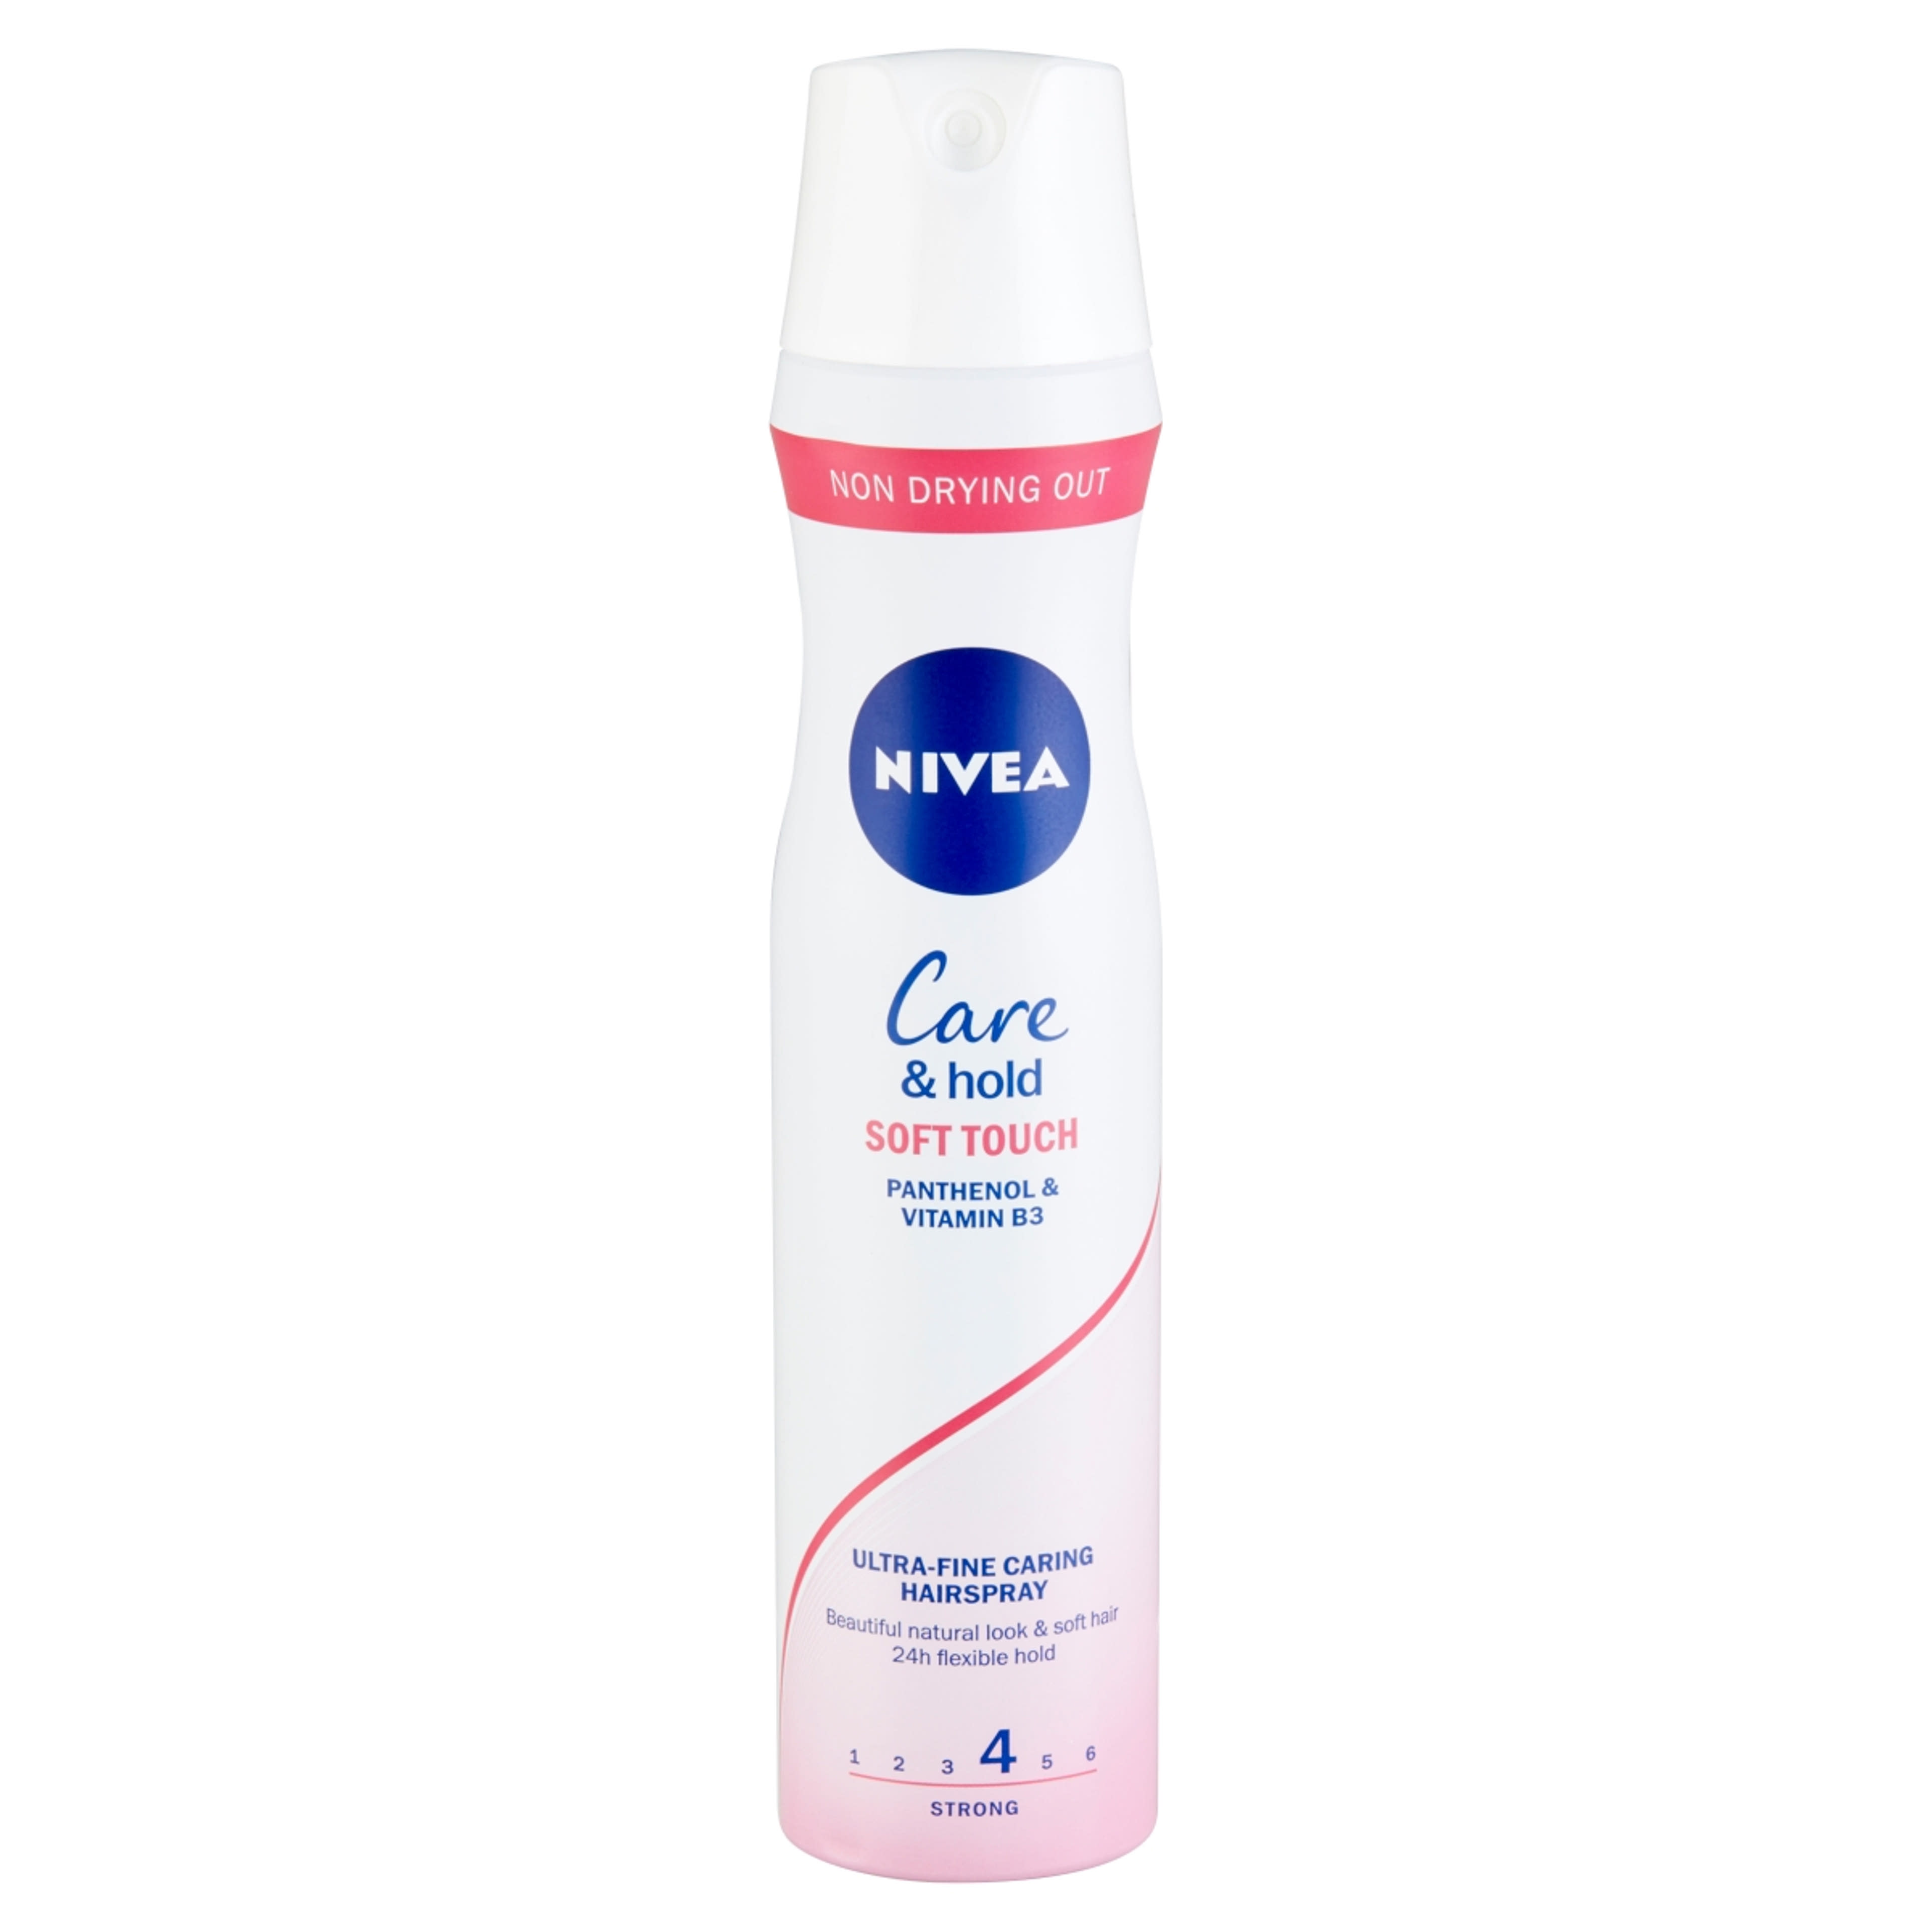 Nivea care & hold soft touch spray - 250 ml-2